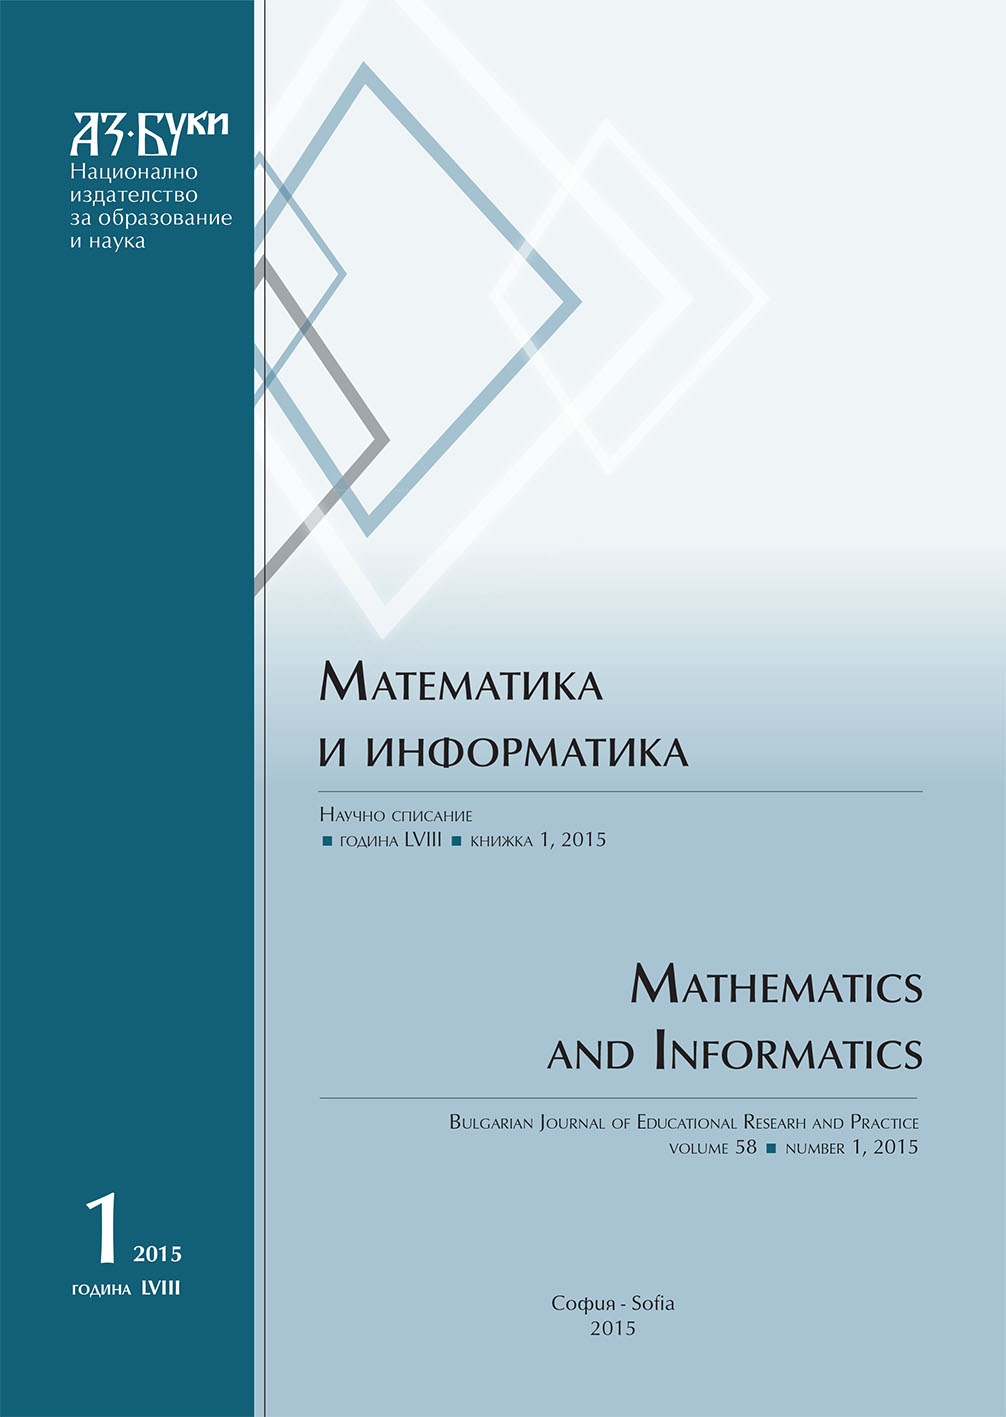 The Computer Improves the Steiner’s Construction of the Malfatti Circles Cover Image